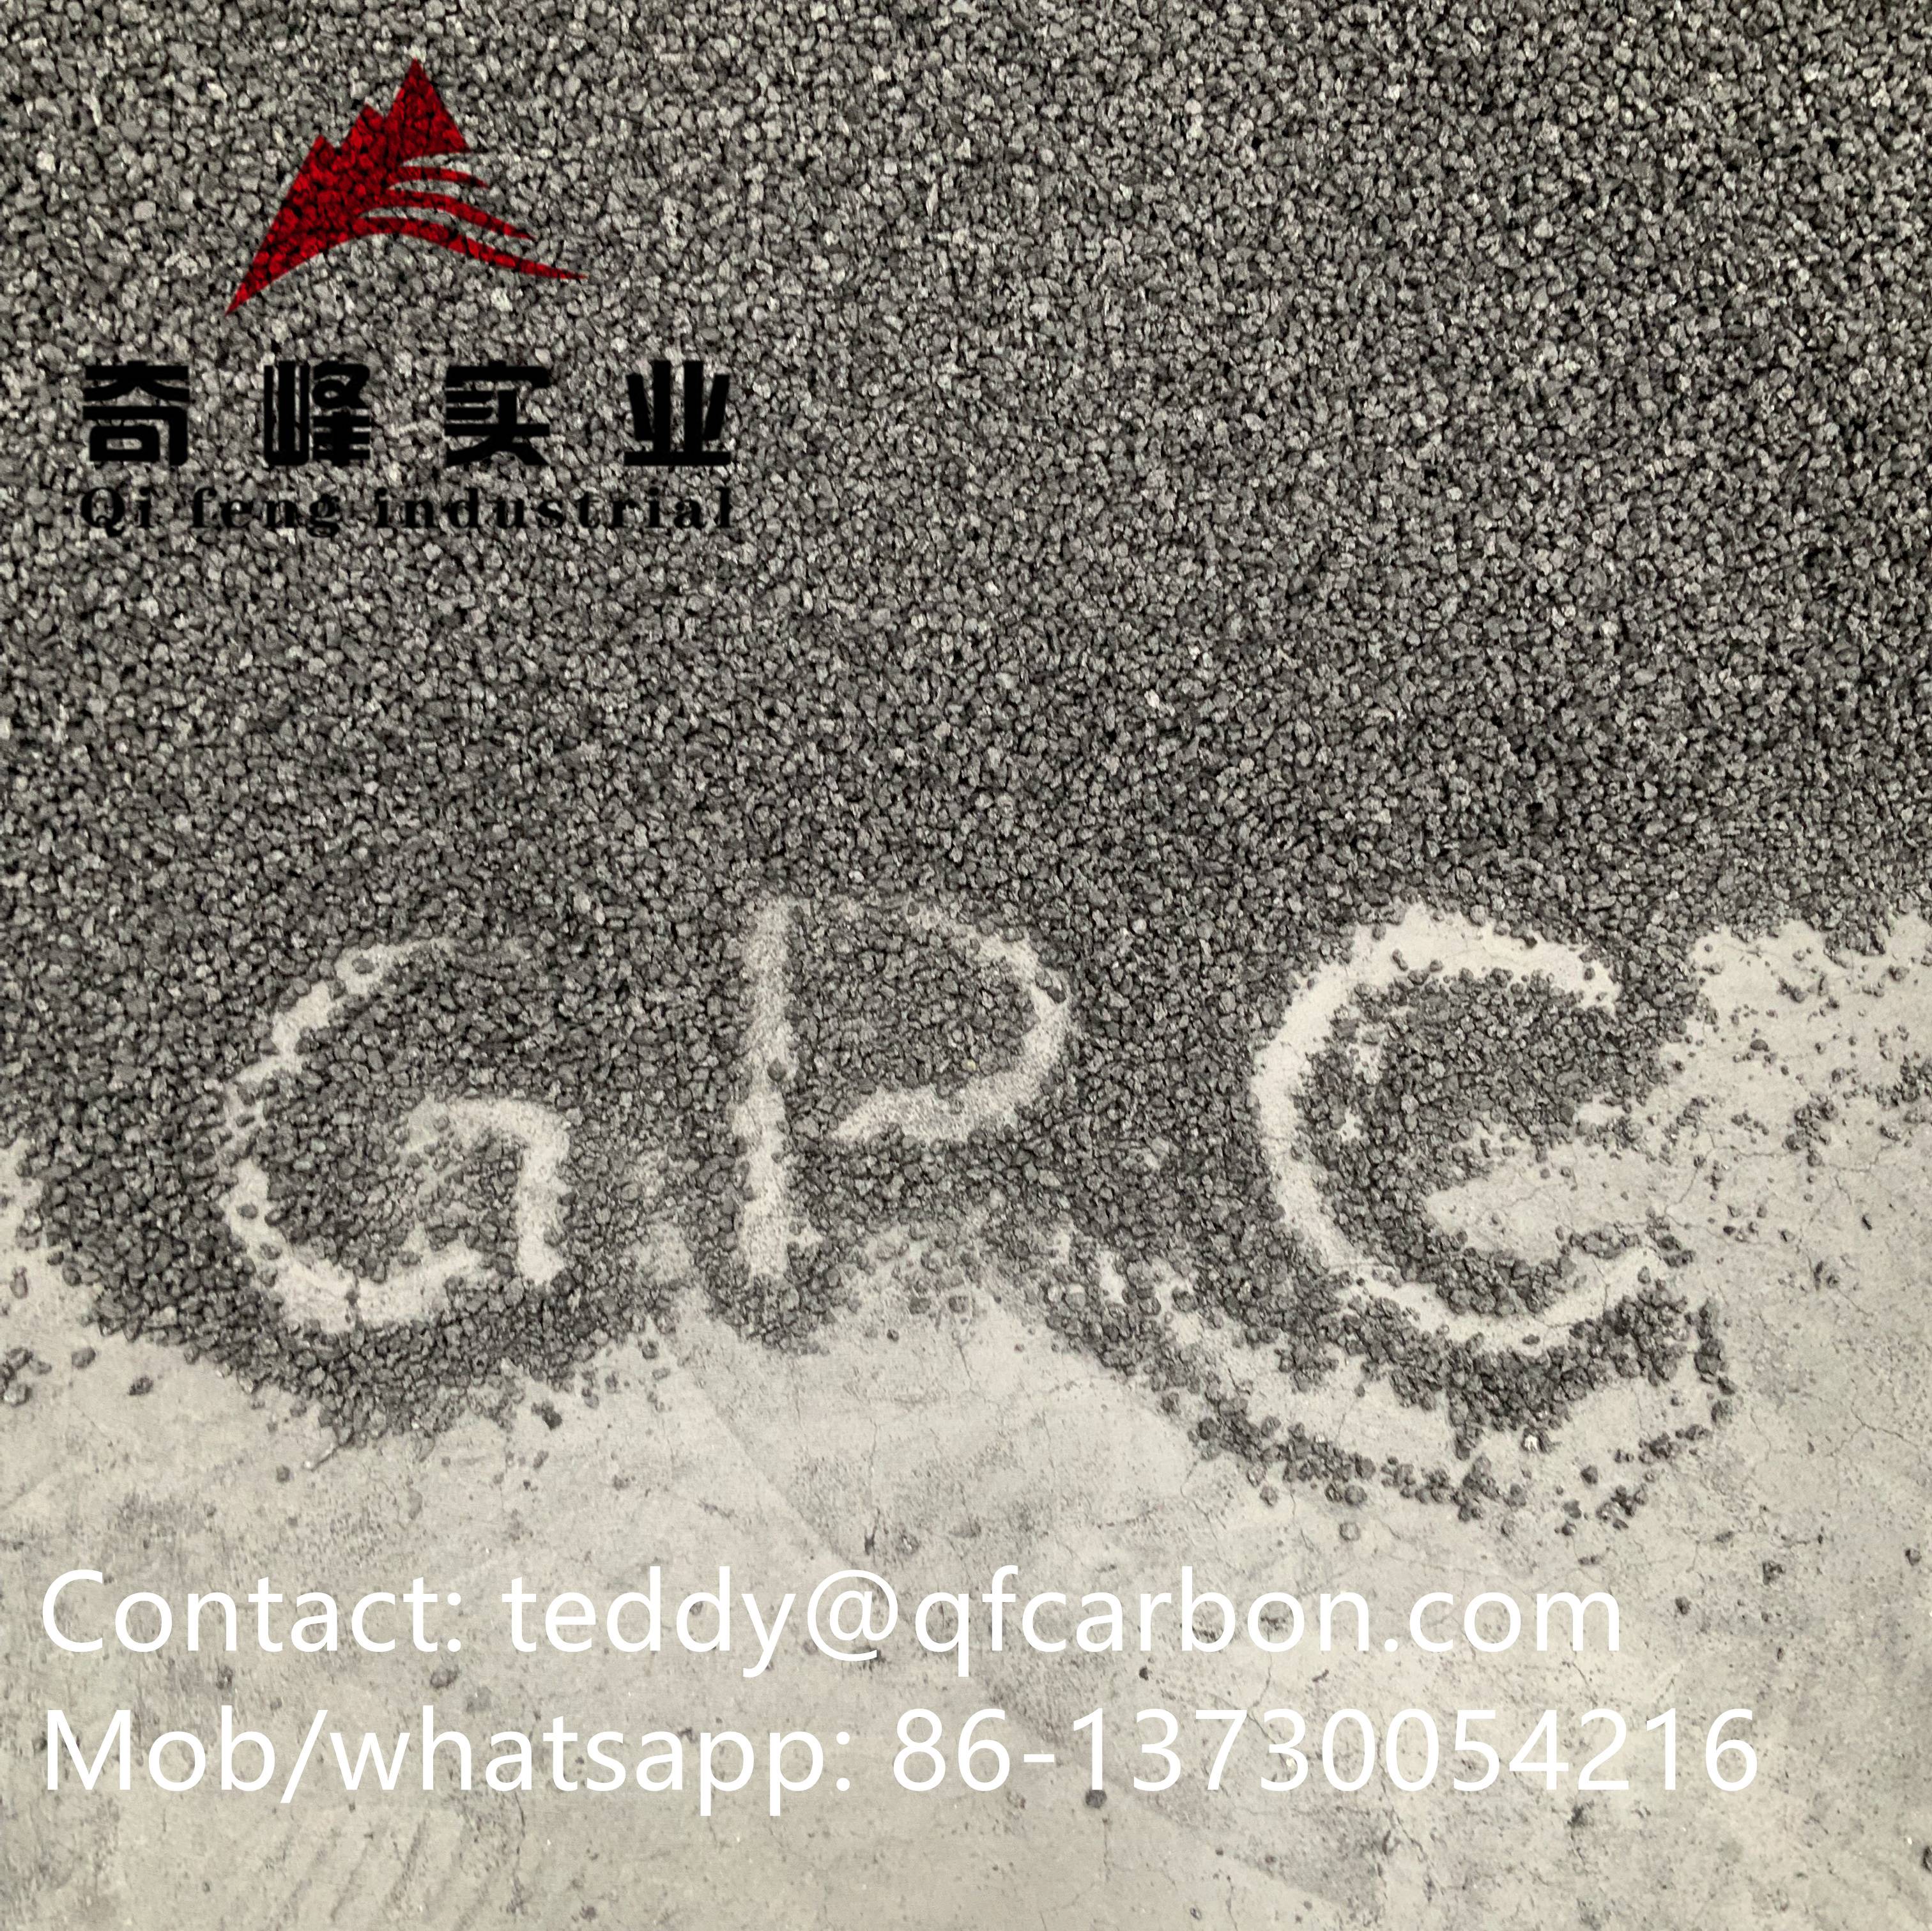 2020 High quality Cast Iron Foundry - Carbon Additive 1-3mm Graphite Petroleum Coke GPC for steel making factory  – Qifeng